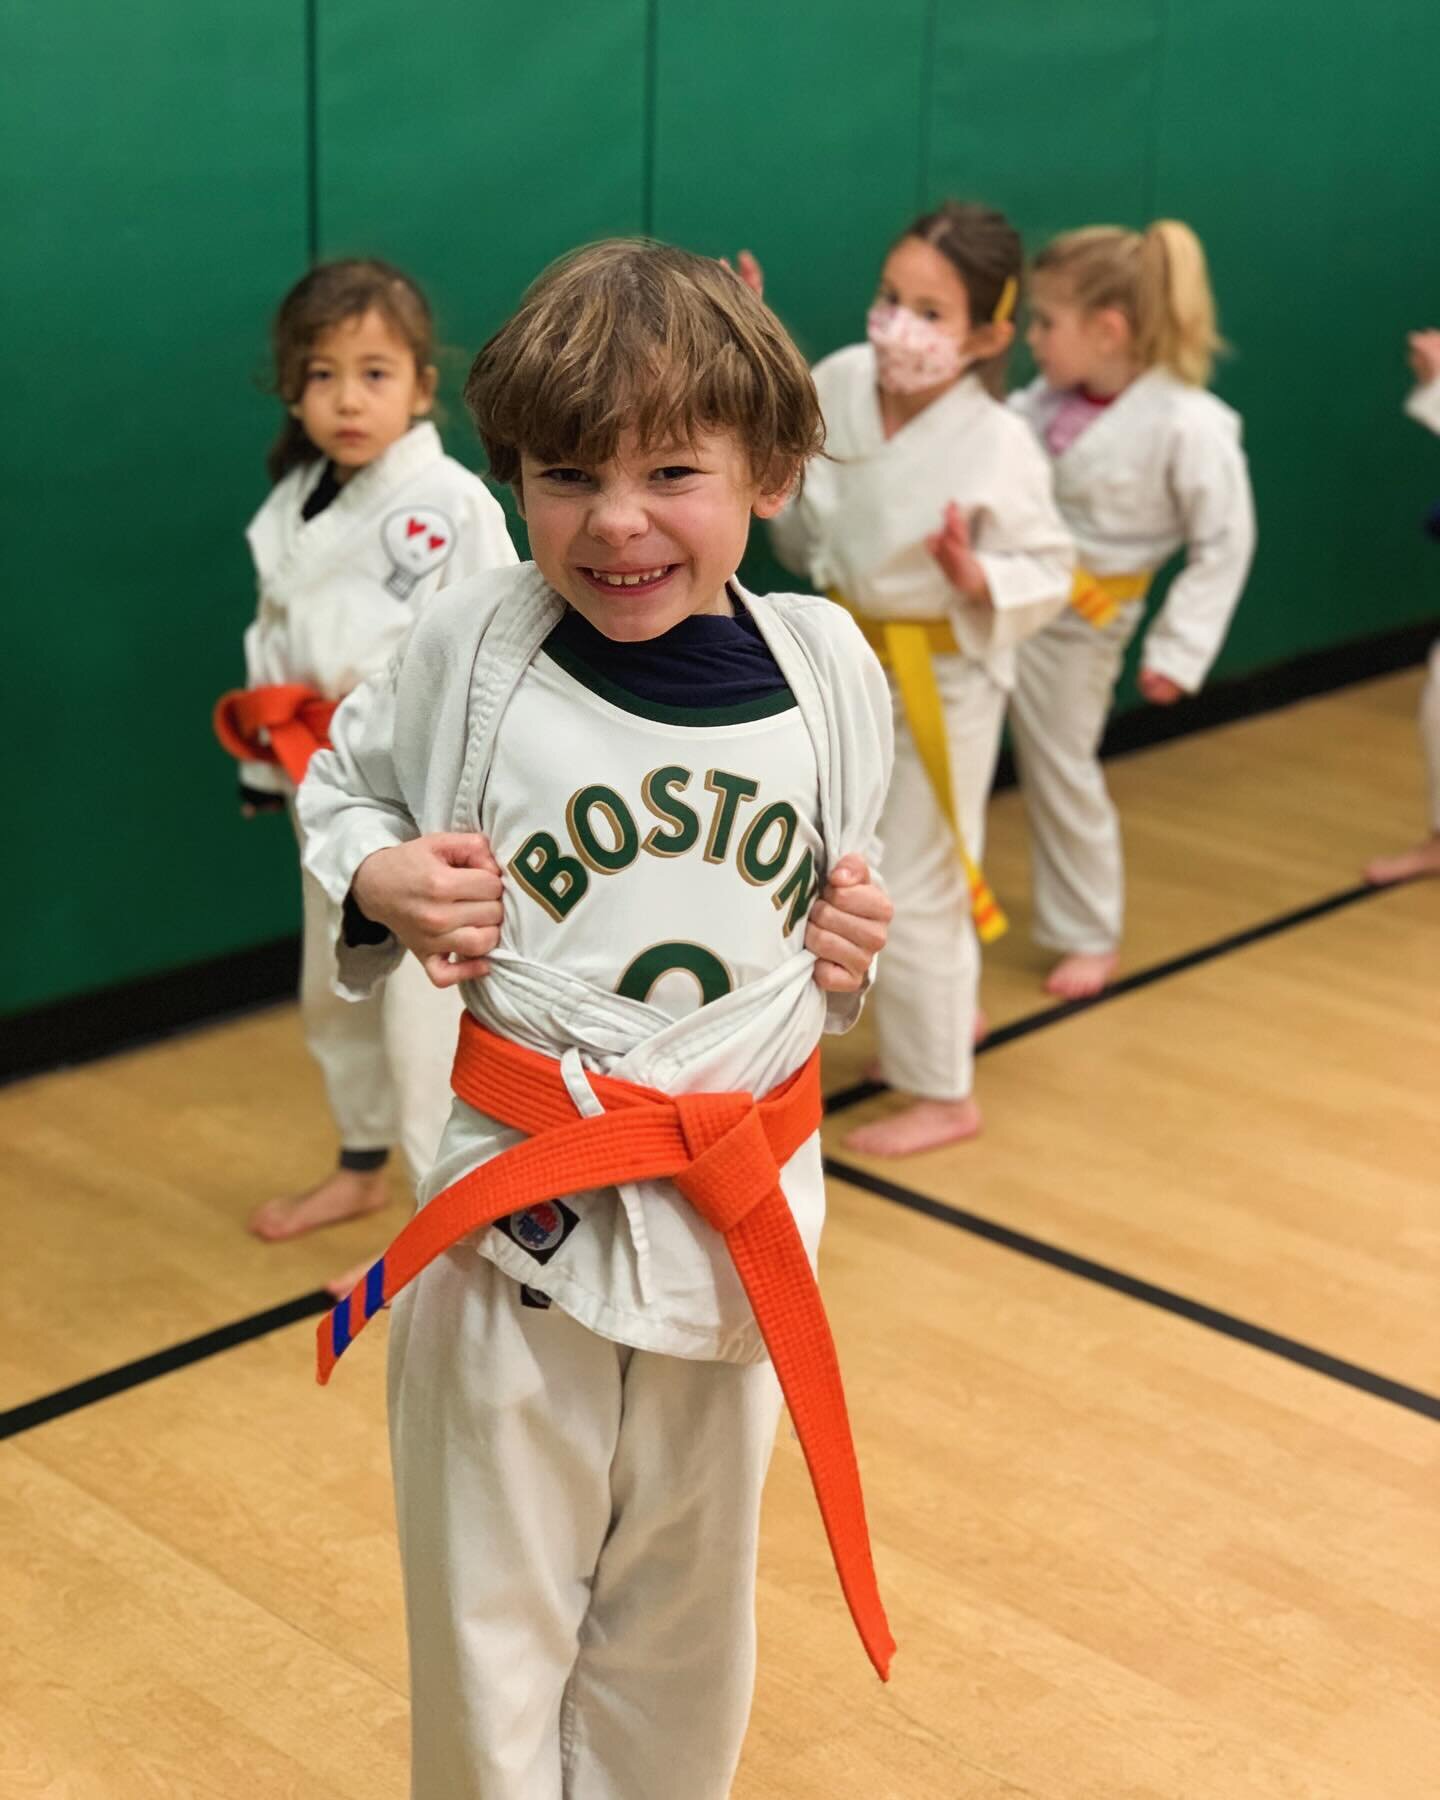 So proud of this little guy but not nearly as proud as he is. ☘️

#celticpride #boston #karate